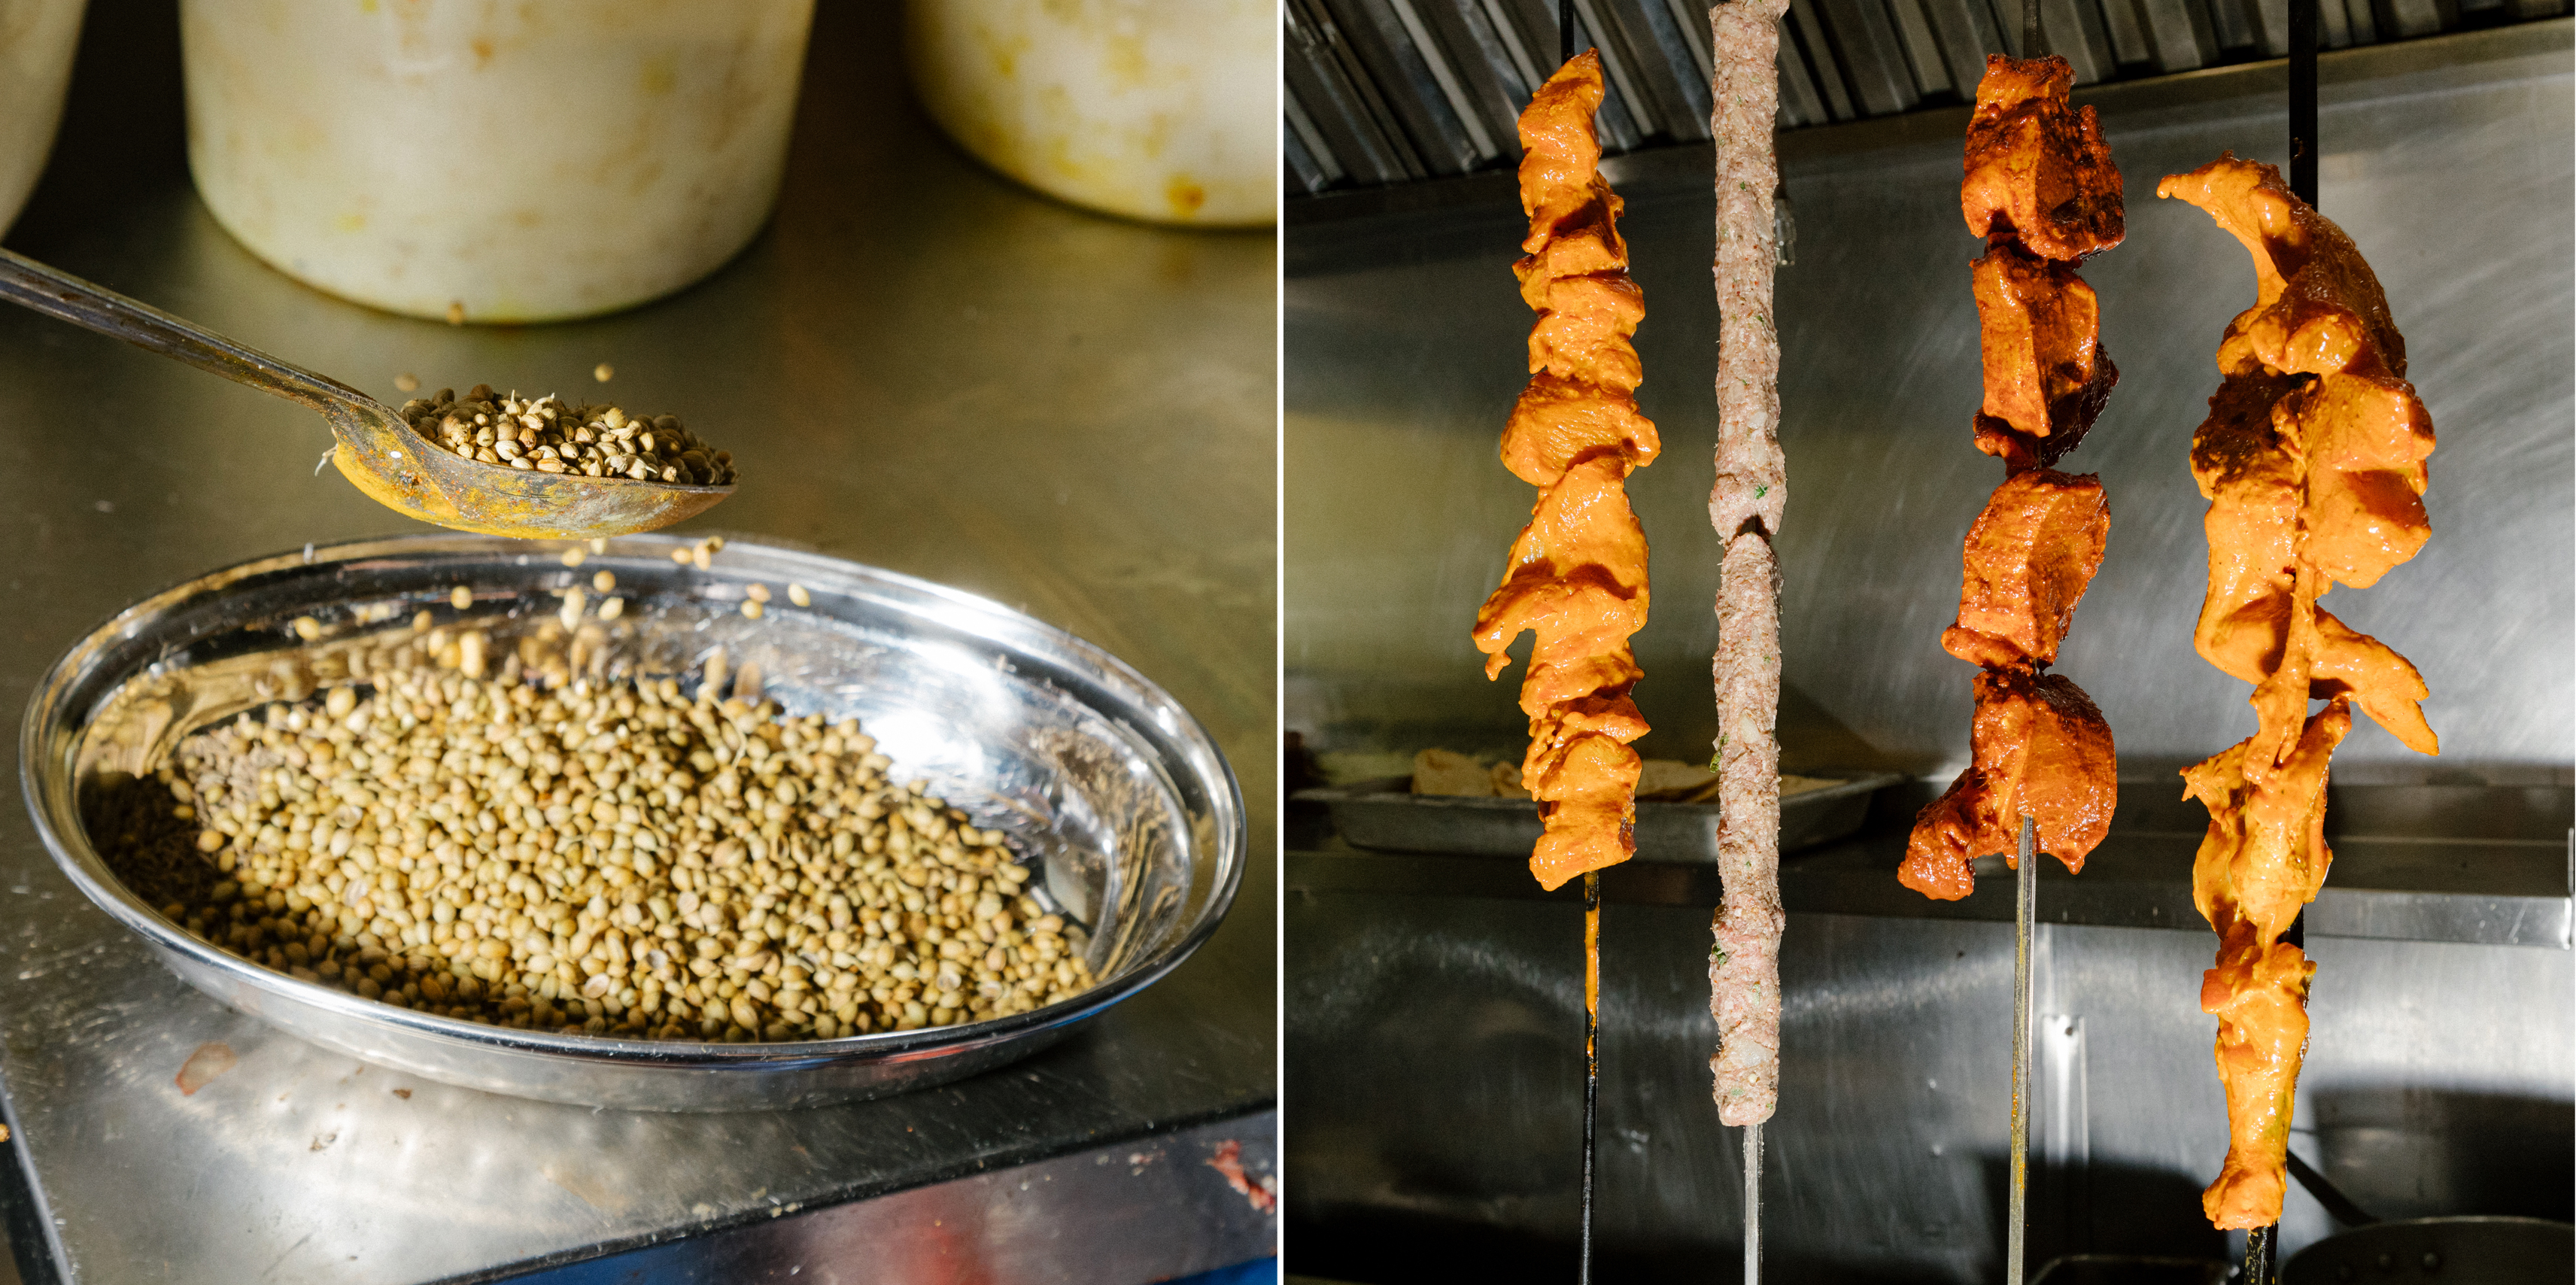 A spoonful of Coriander, left, and chicken, seekh, lamb, and chicken thigh kabob skewers, right, before being grilled in a tandoor oven that gives the food its signature smokey flavor.